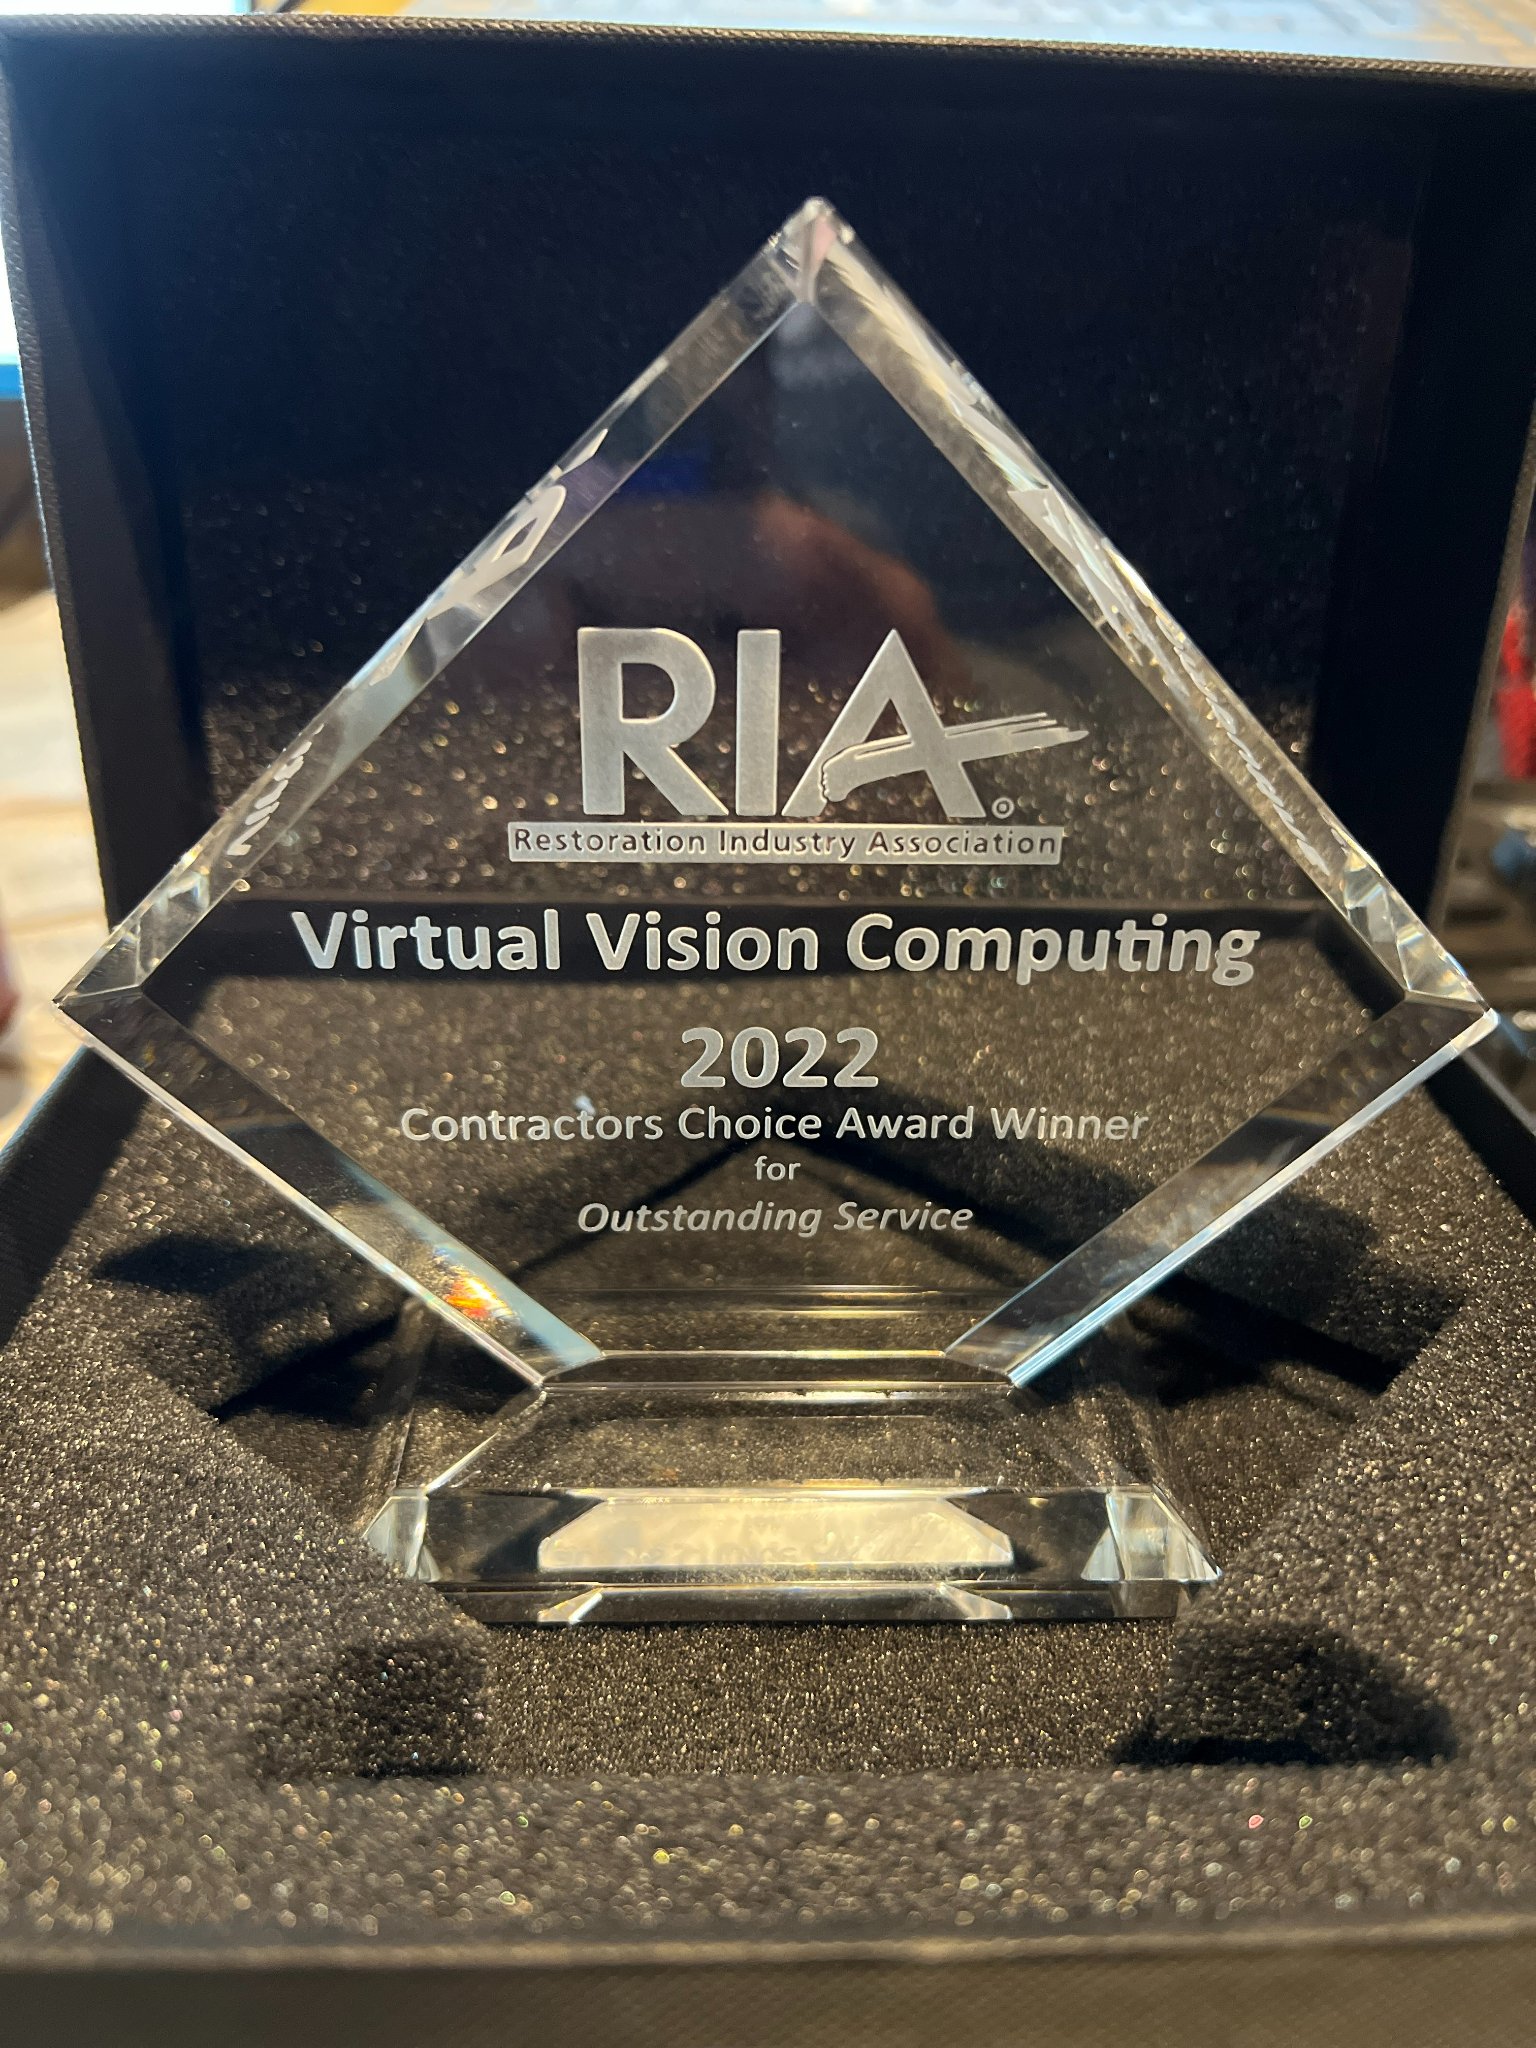 Virtual Vision Computing - 2022 Contractor's Choice Award Winner for Outstanding Service